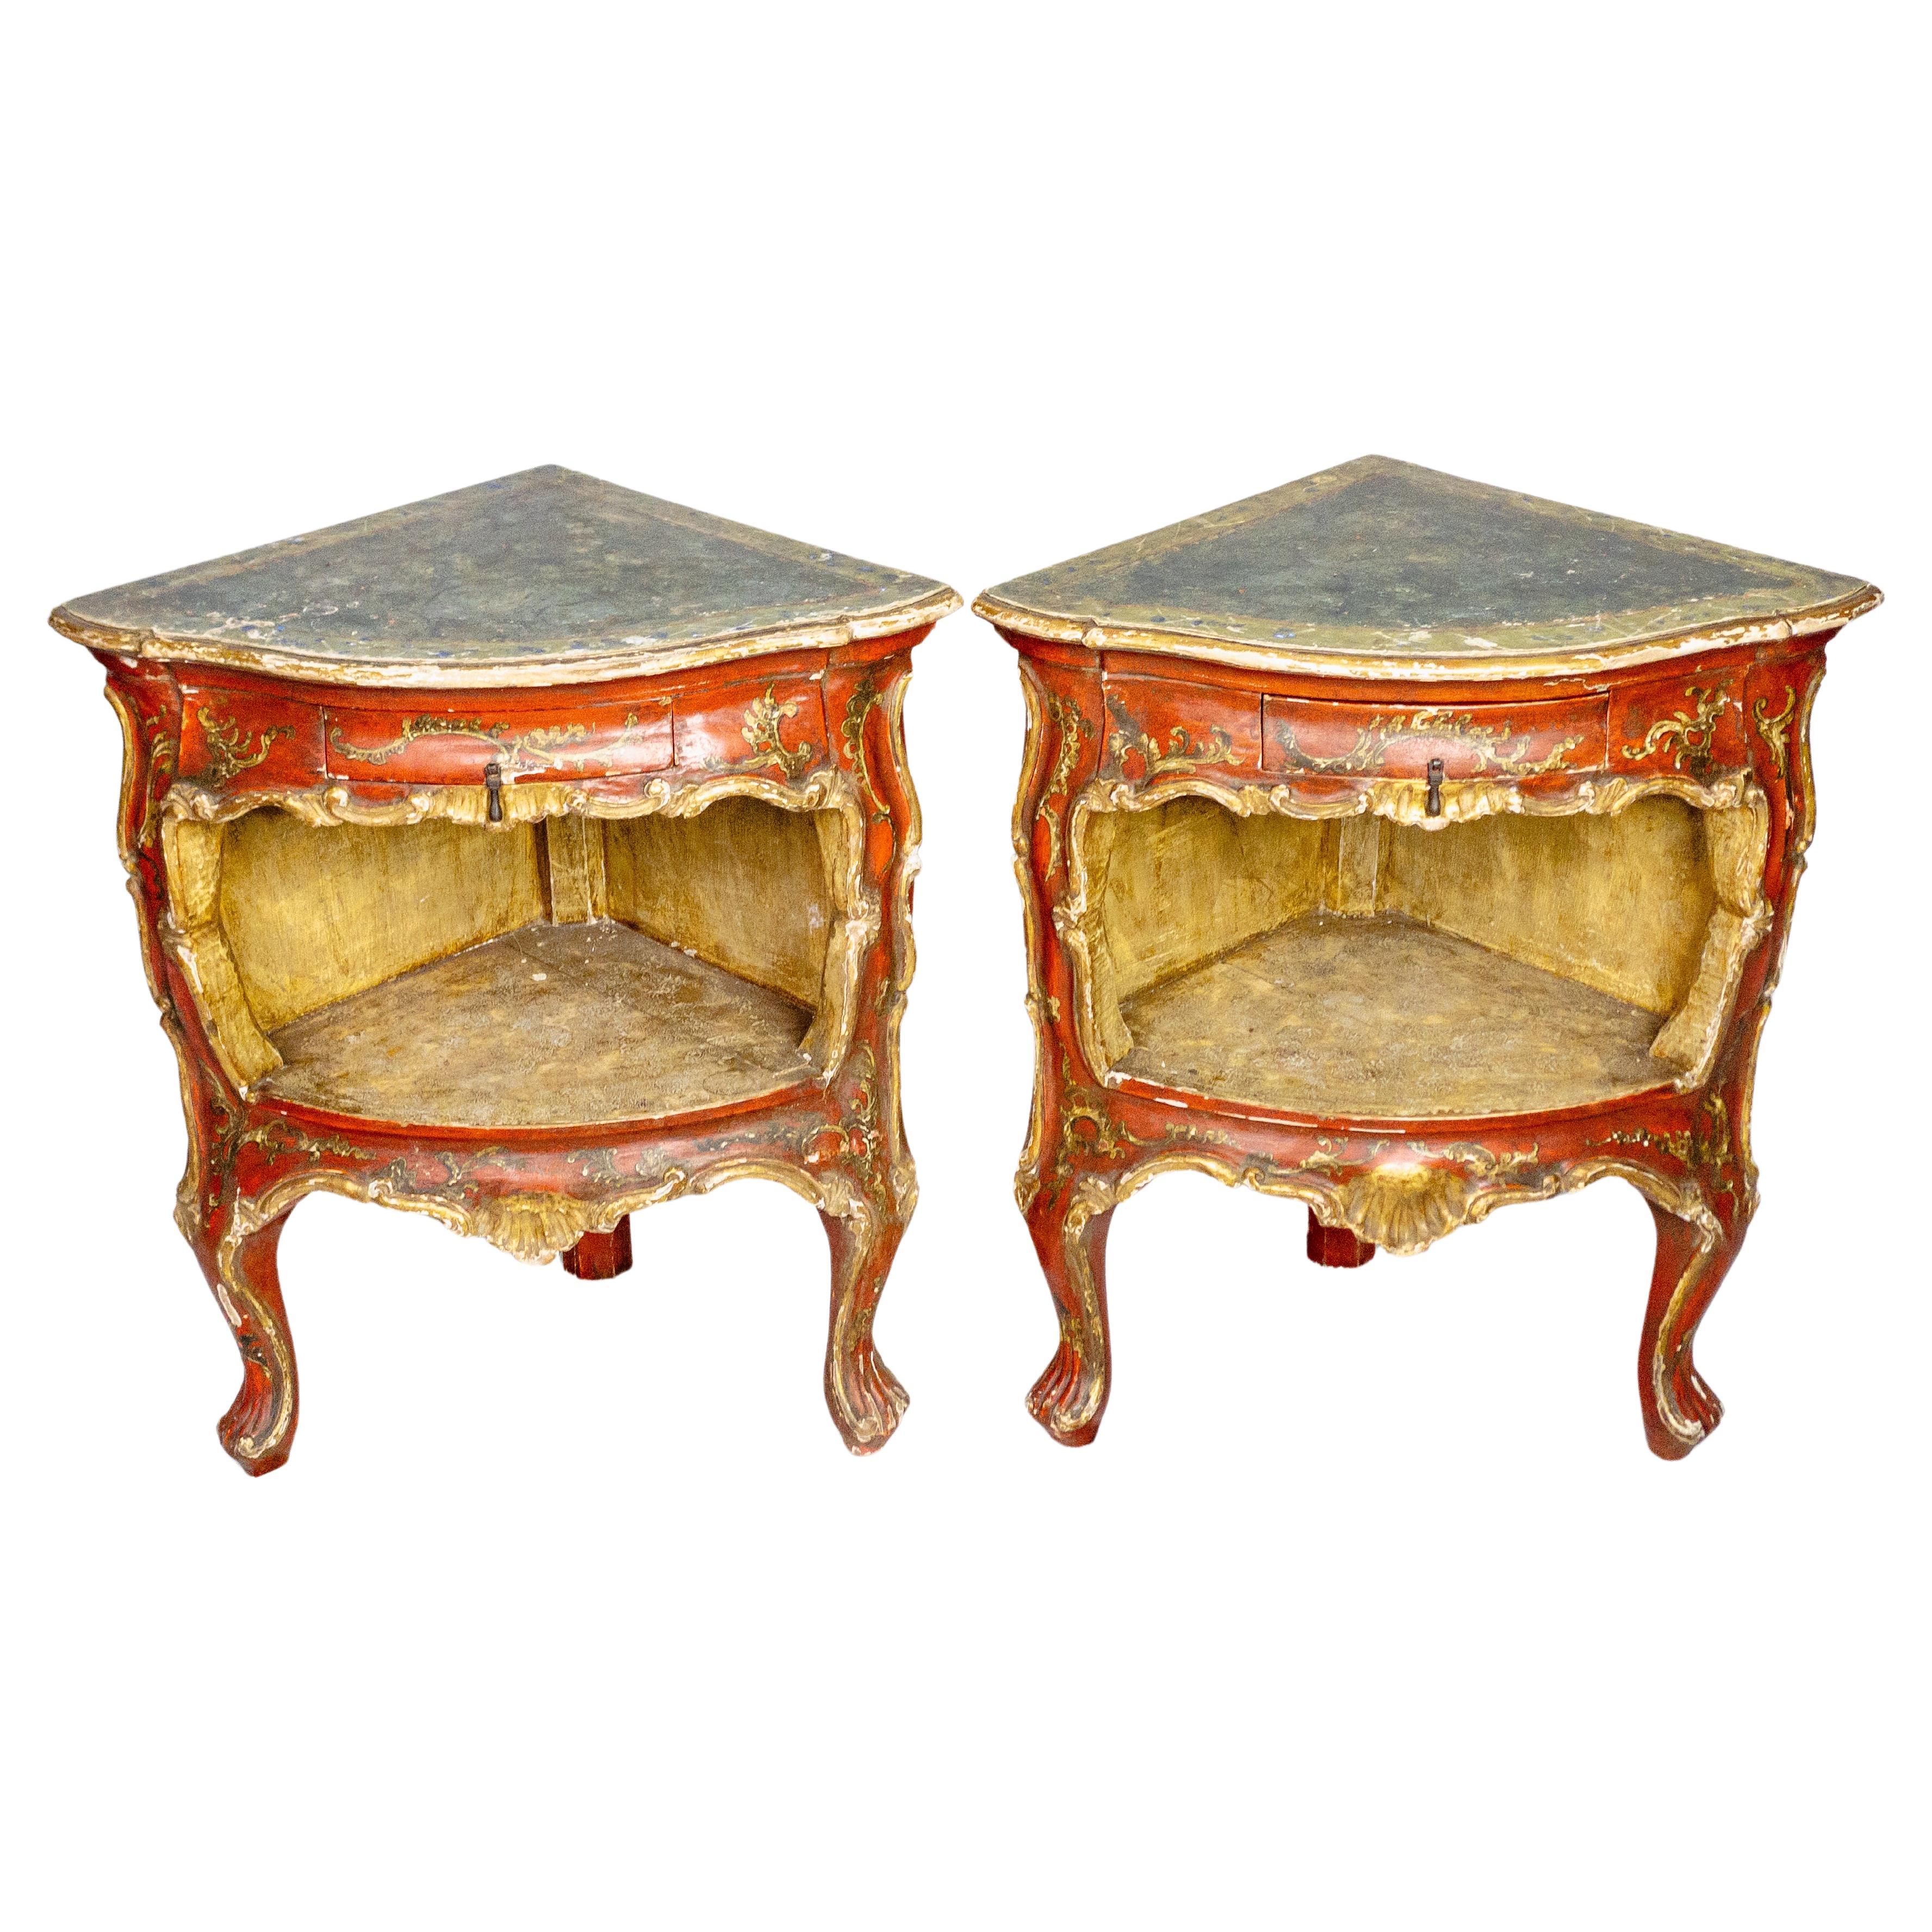 Pair of 19th Century Italian Painted Chests